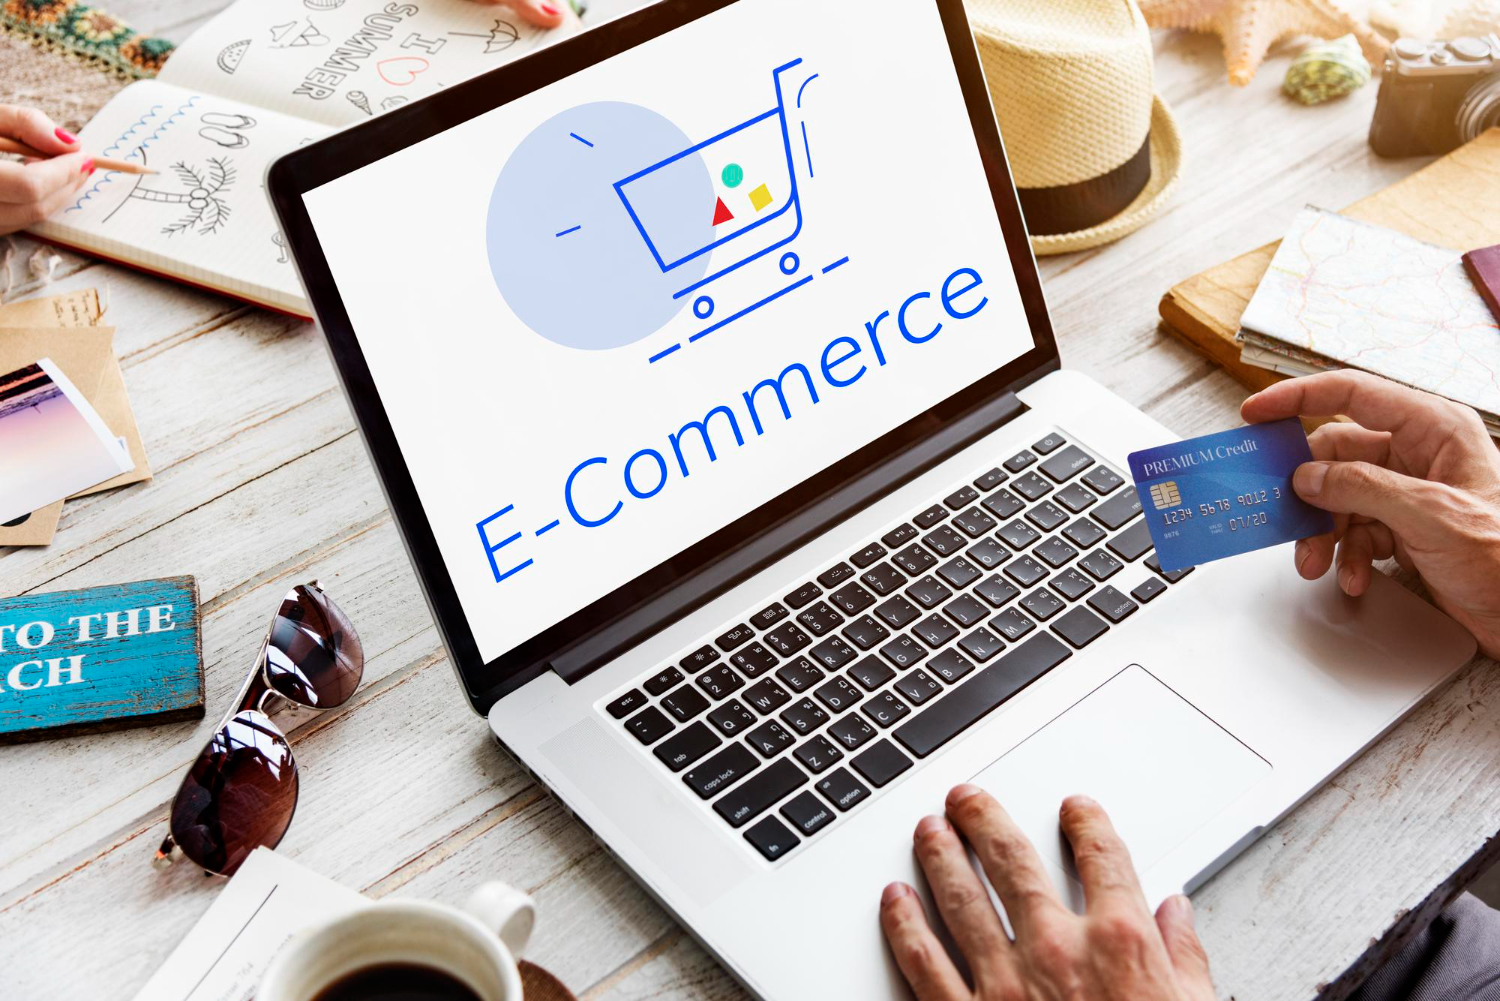 Rise of e-commerce platforms and online marketplaces